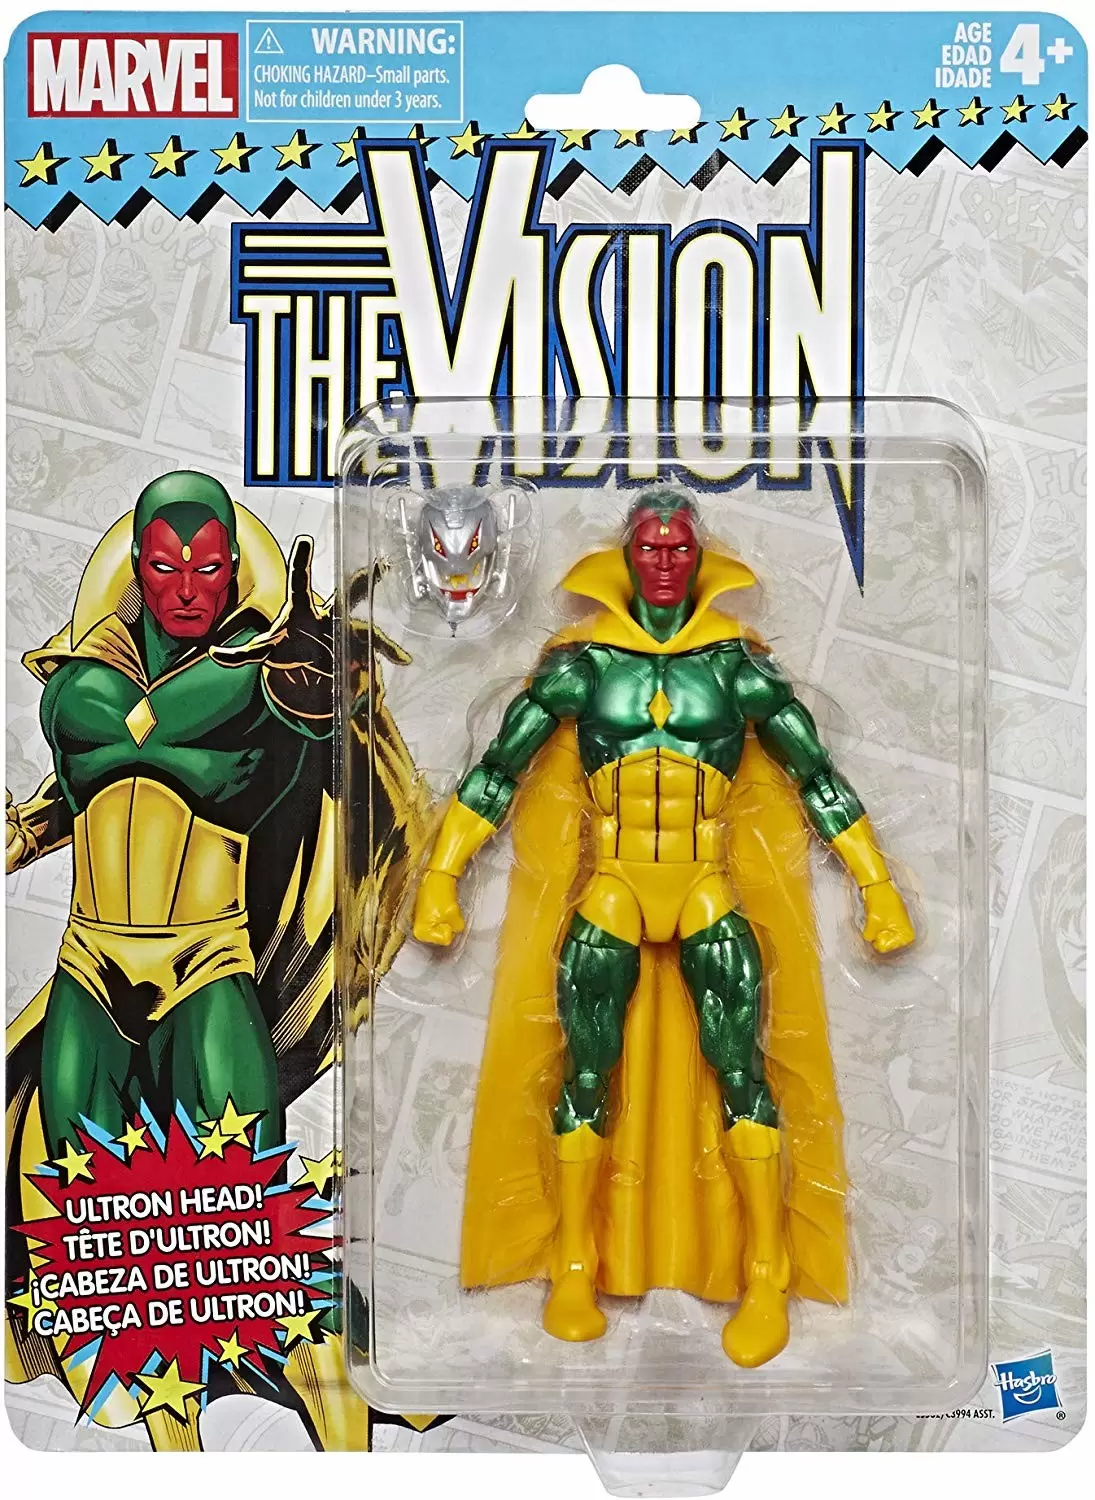 Marvel Legends 6 inch Retro Collection - Vision